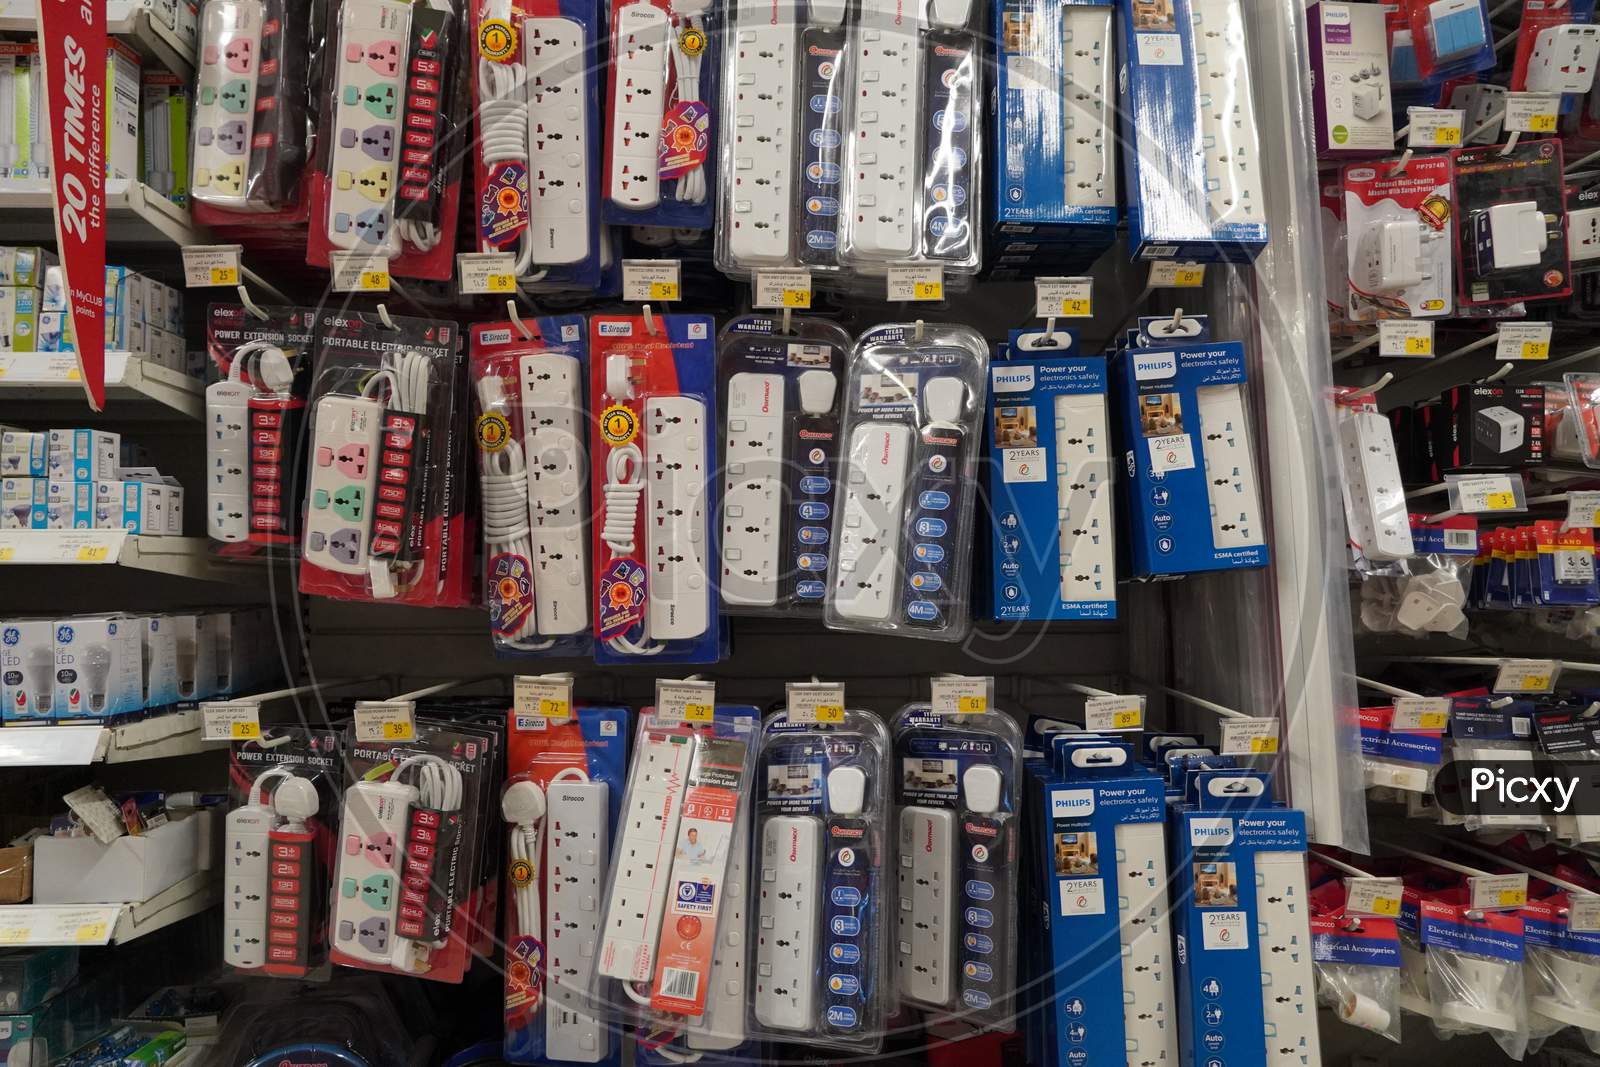 Selection Of Extension 3 Pin Plug Socket Wire On Supermarket. Many Adapter Power Plug Or Extension Cord Hang On The Shelf. Packed Ready Different Kinds Of Power Strips.